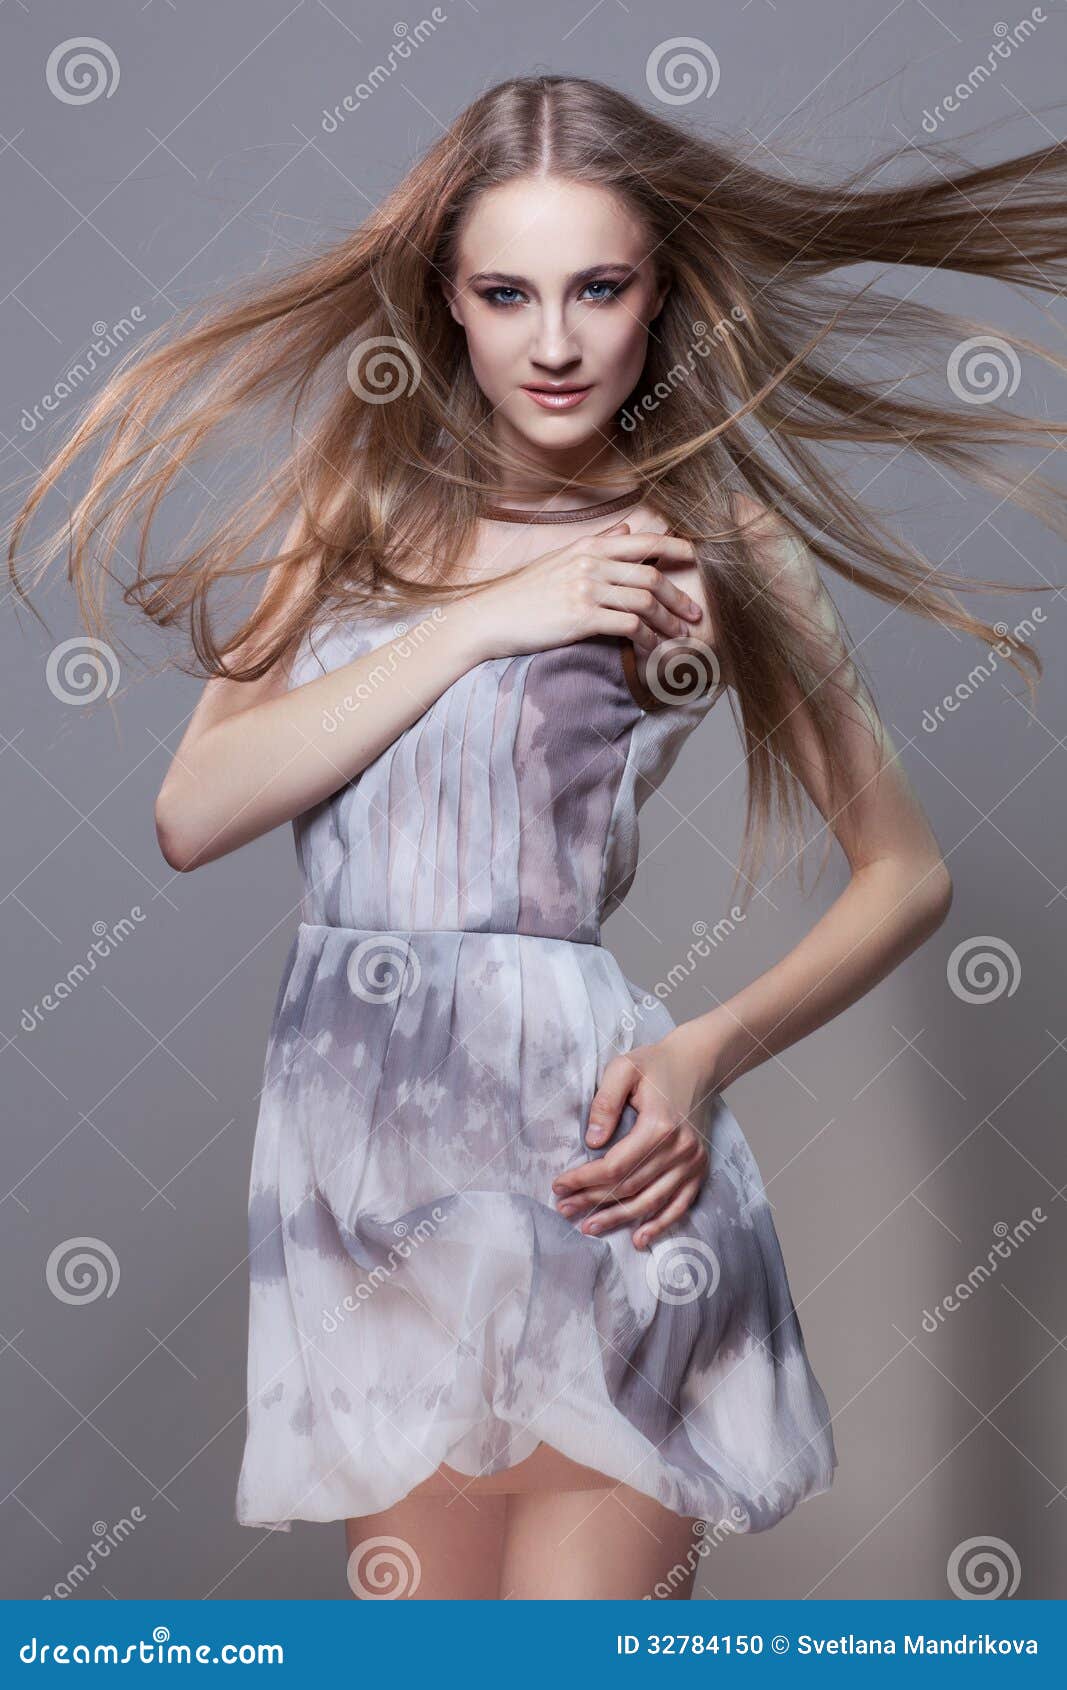 ... standing beautiful girl with flying hair in fashionable short dress